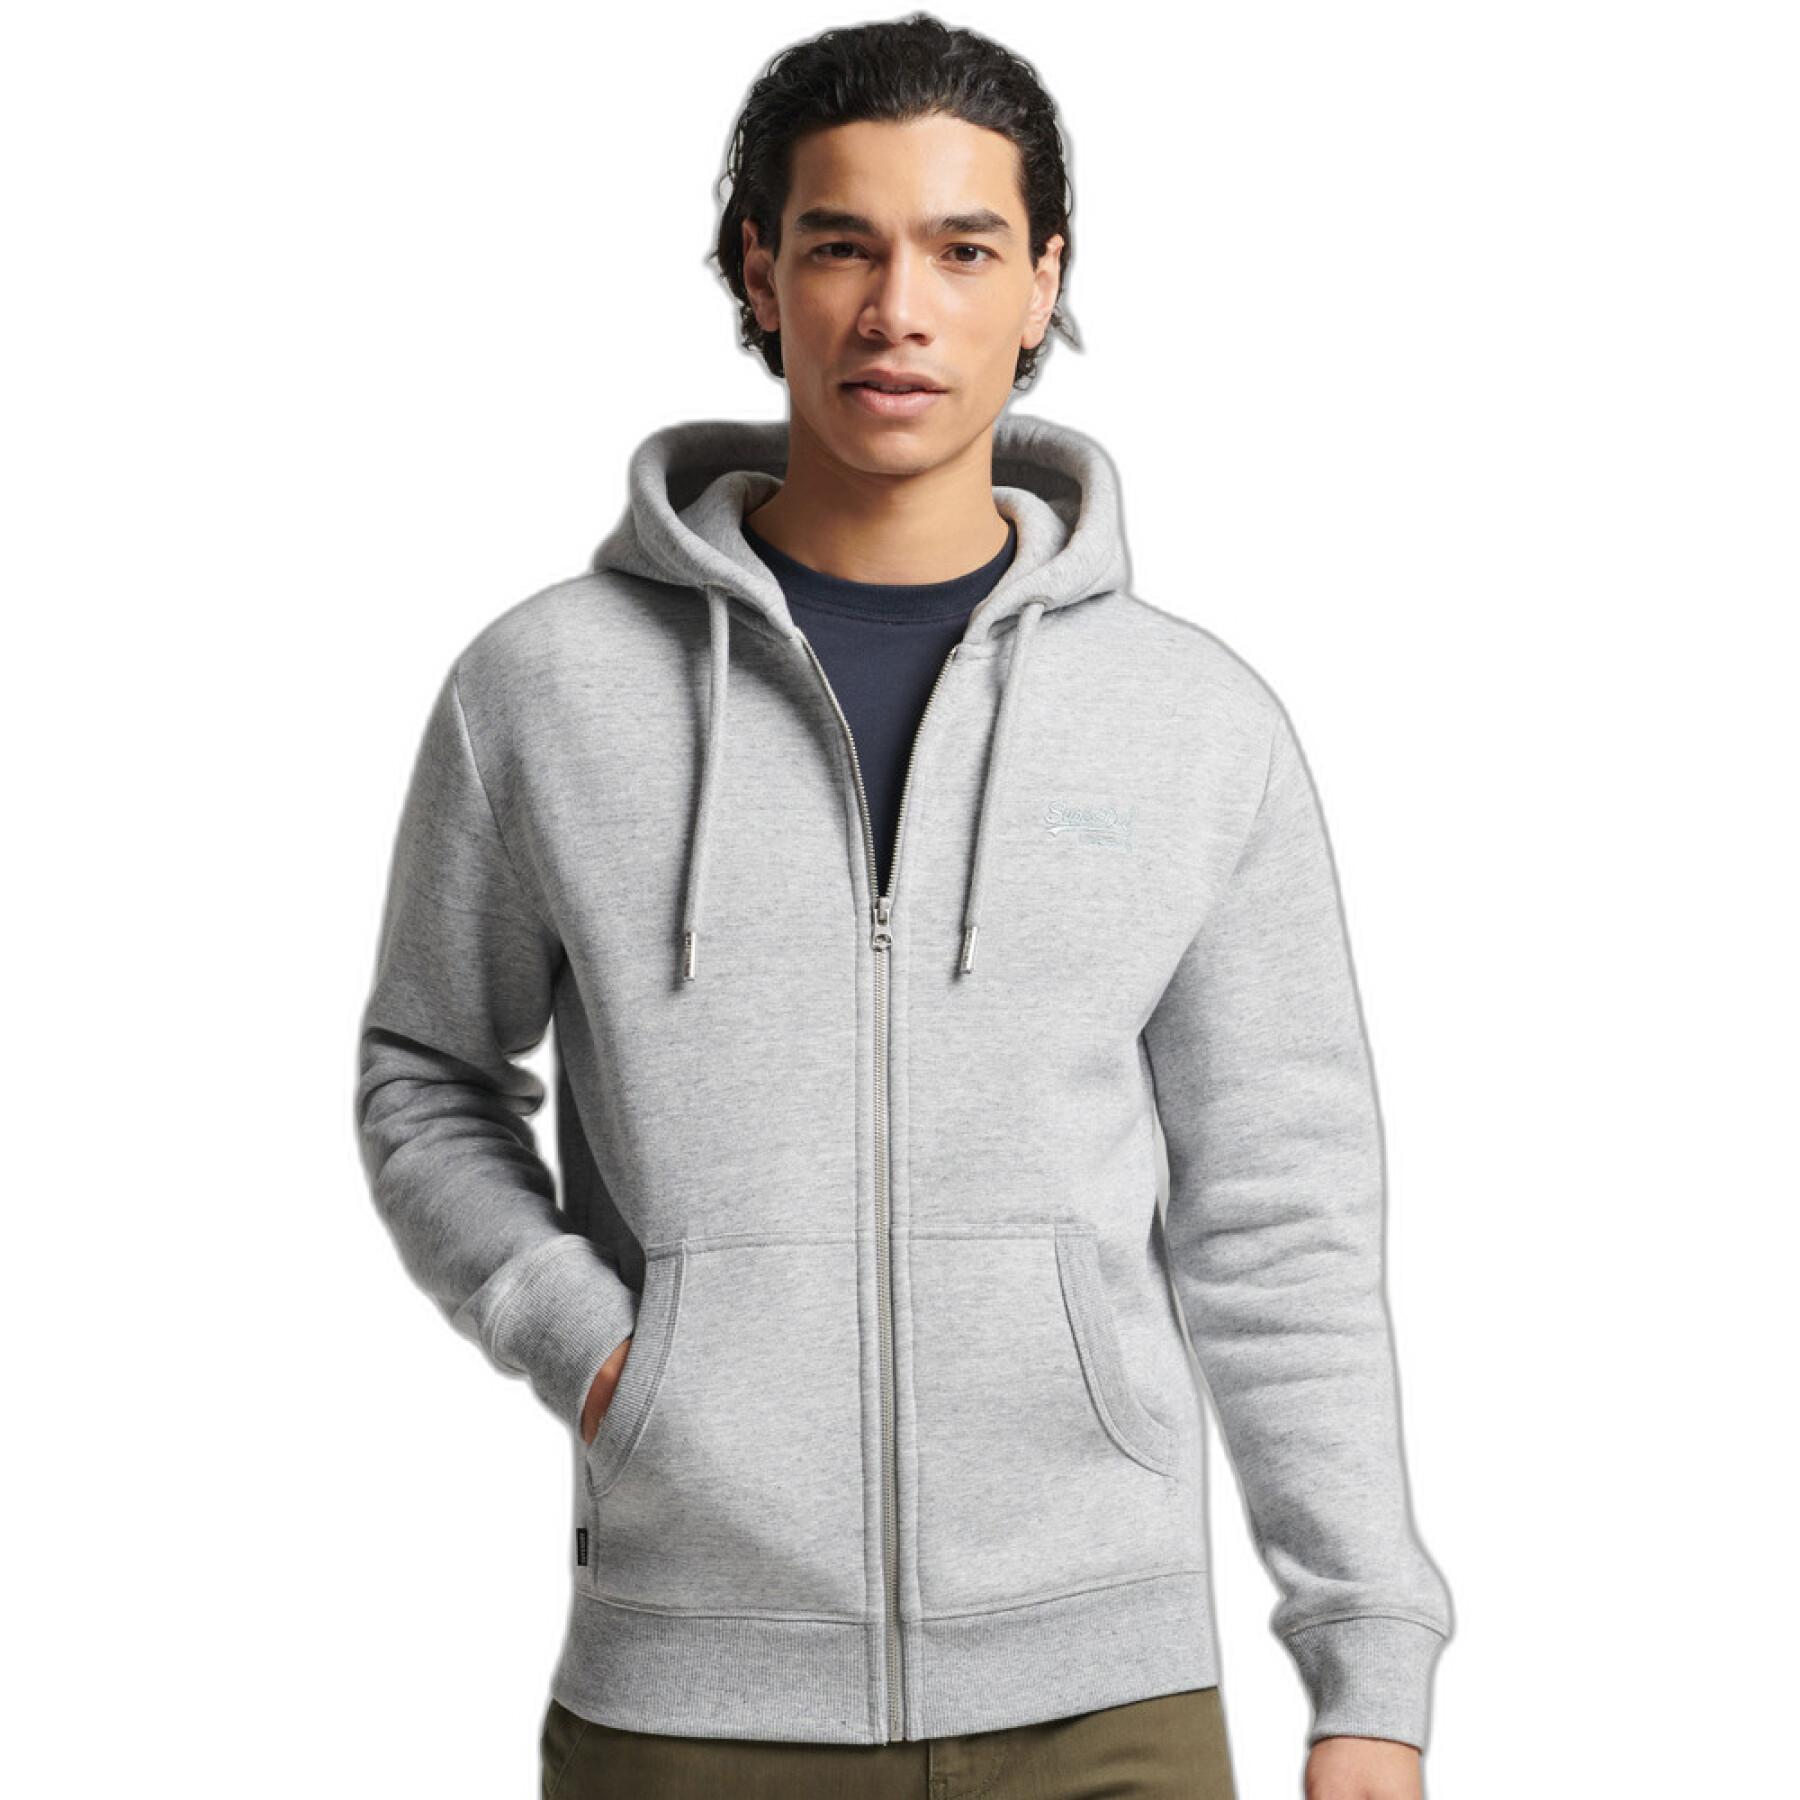 Organic cotton zipped hoodie with embroidered logo Superdry Vintage